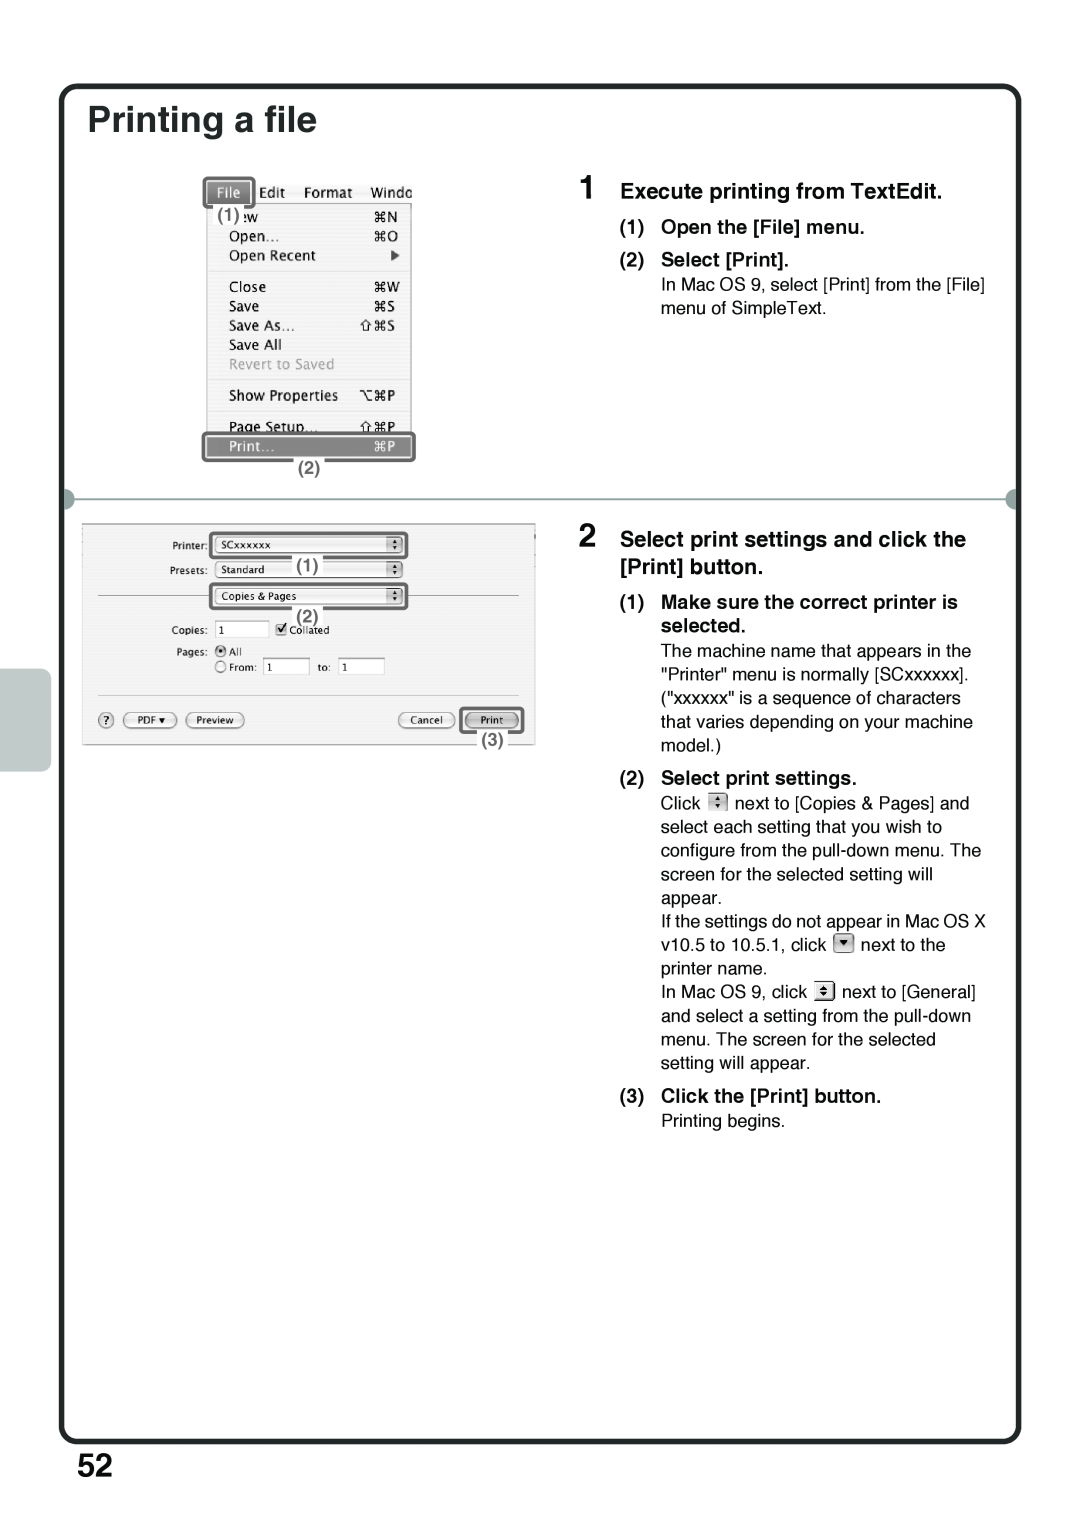 Sharp MX-4101N Printing a file, Execute printing from TextEdit, Select print settings and click the, Print button 